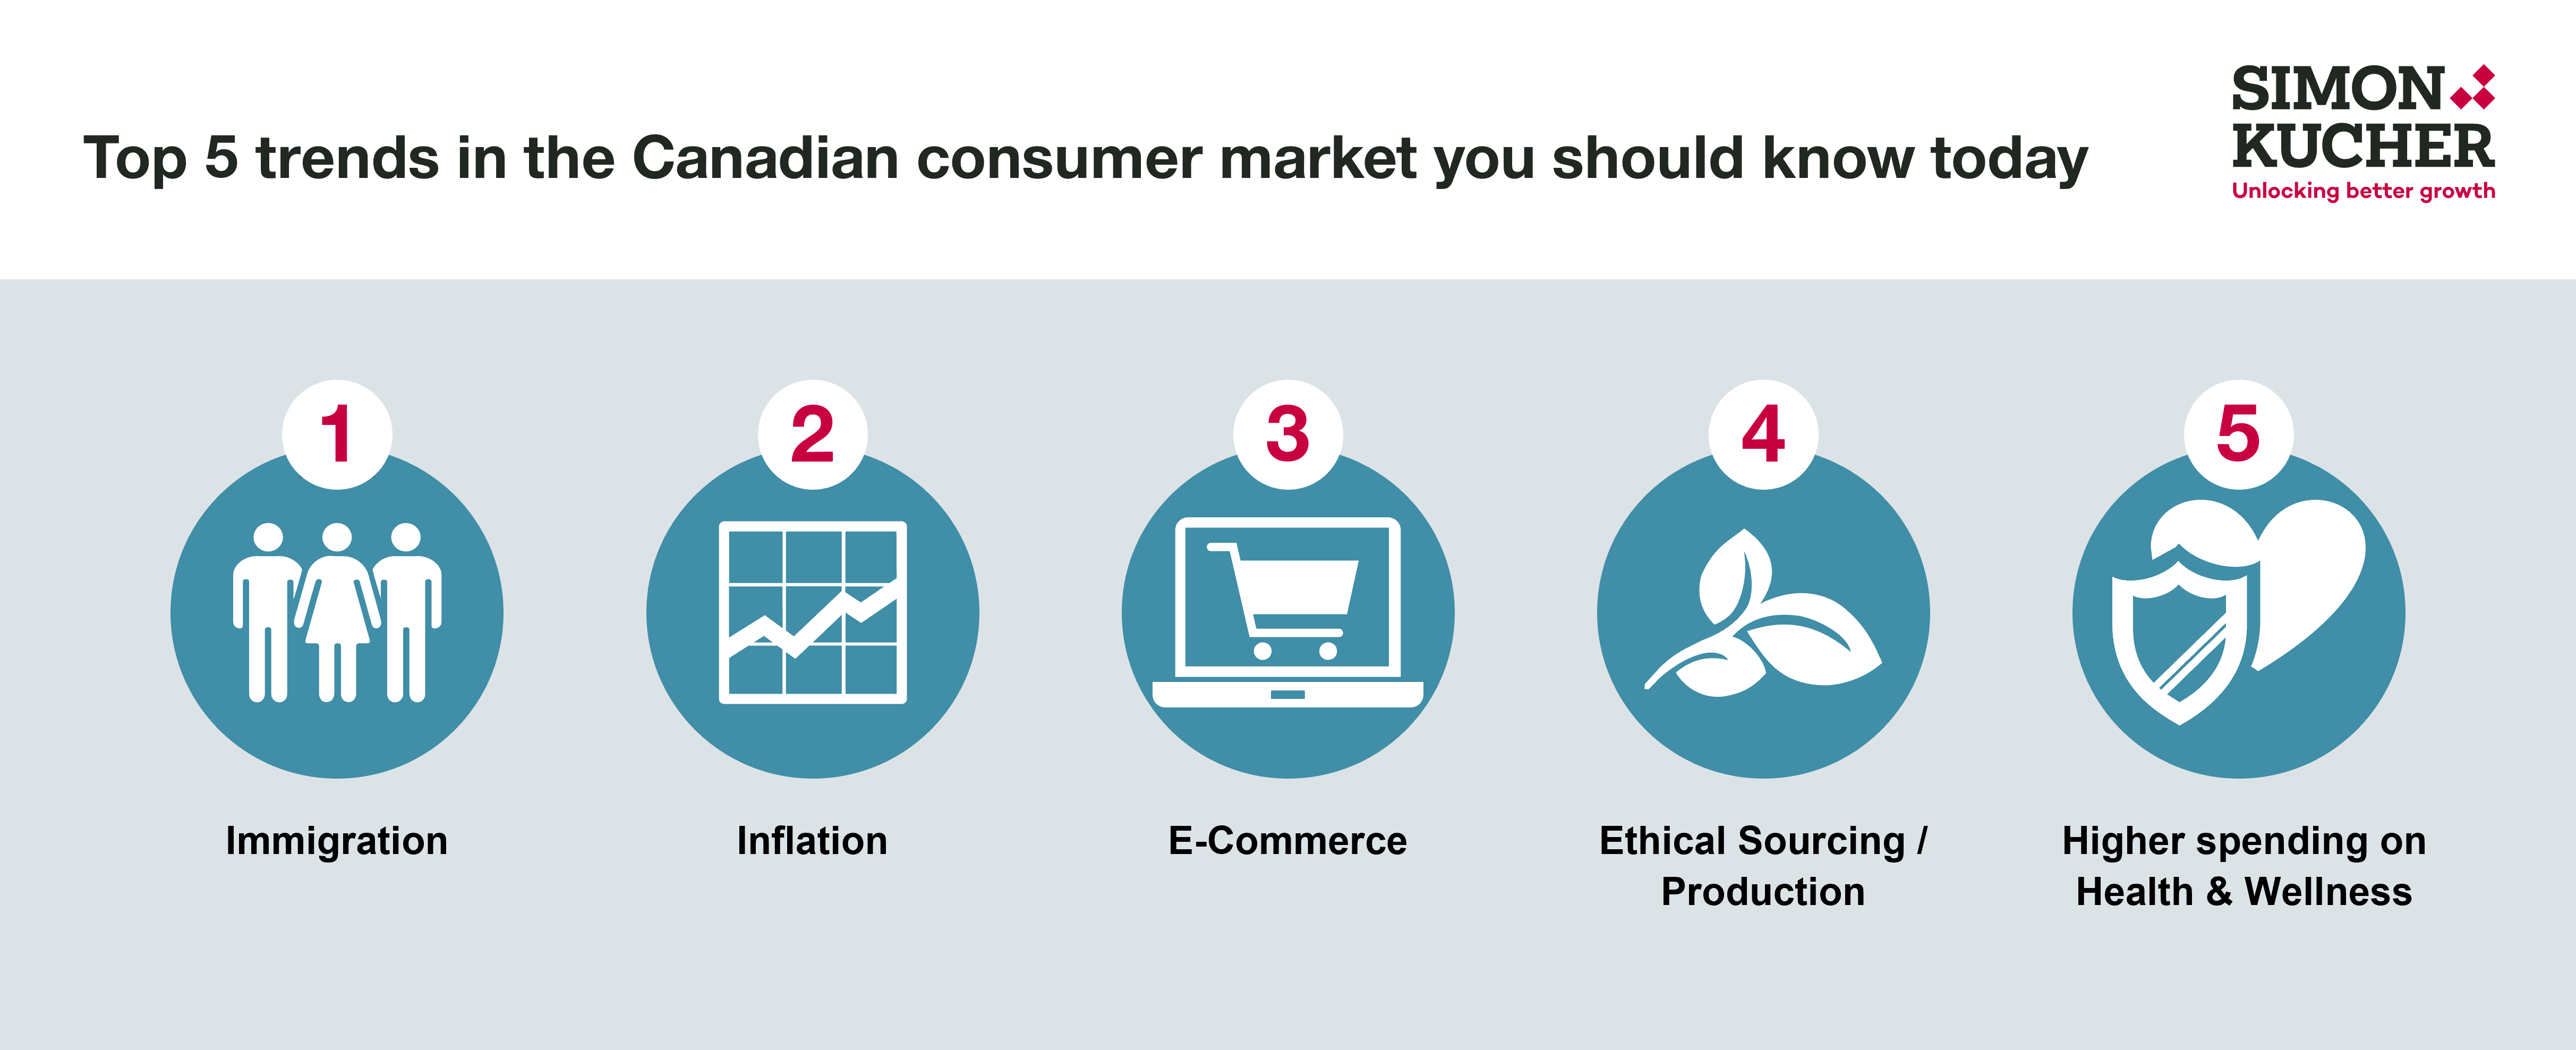 Top 5 trends in the consumer retail market in Canada